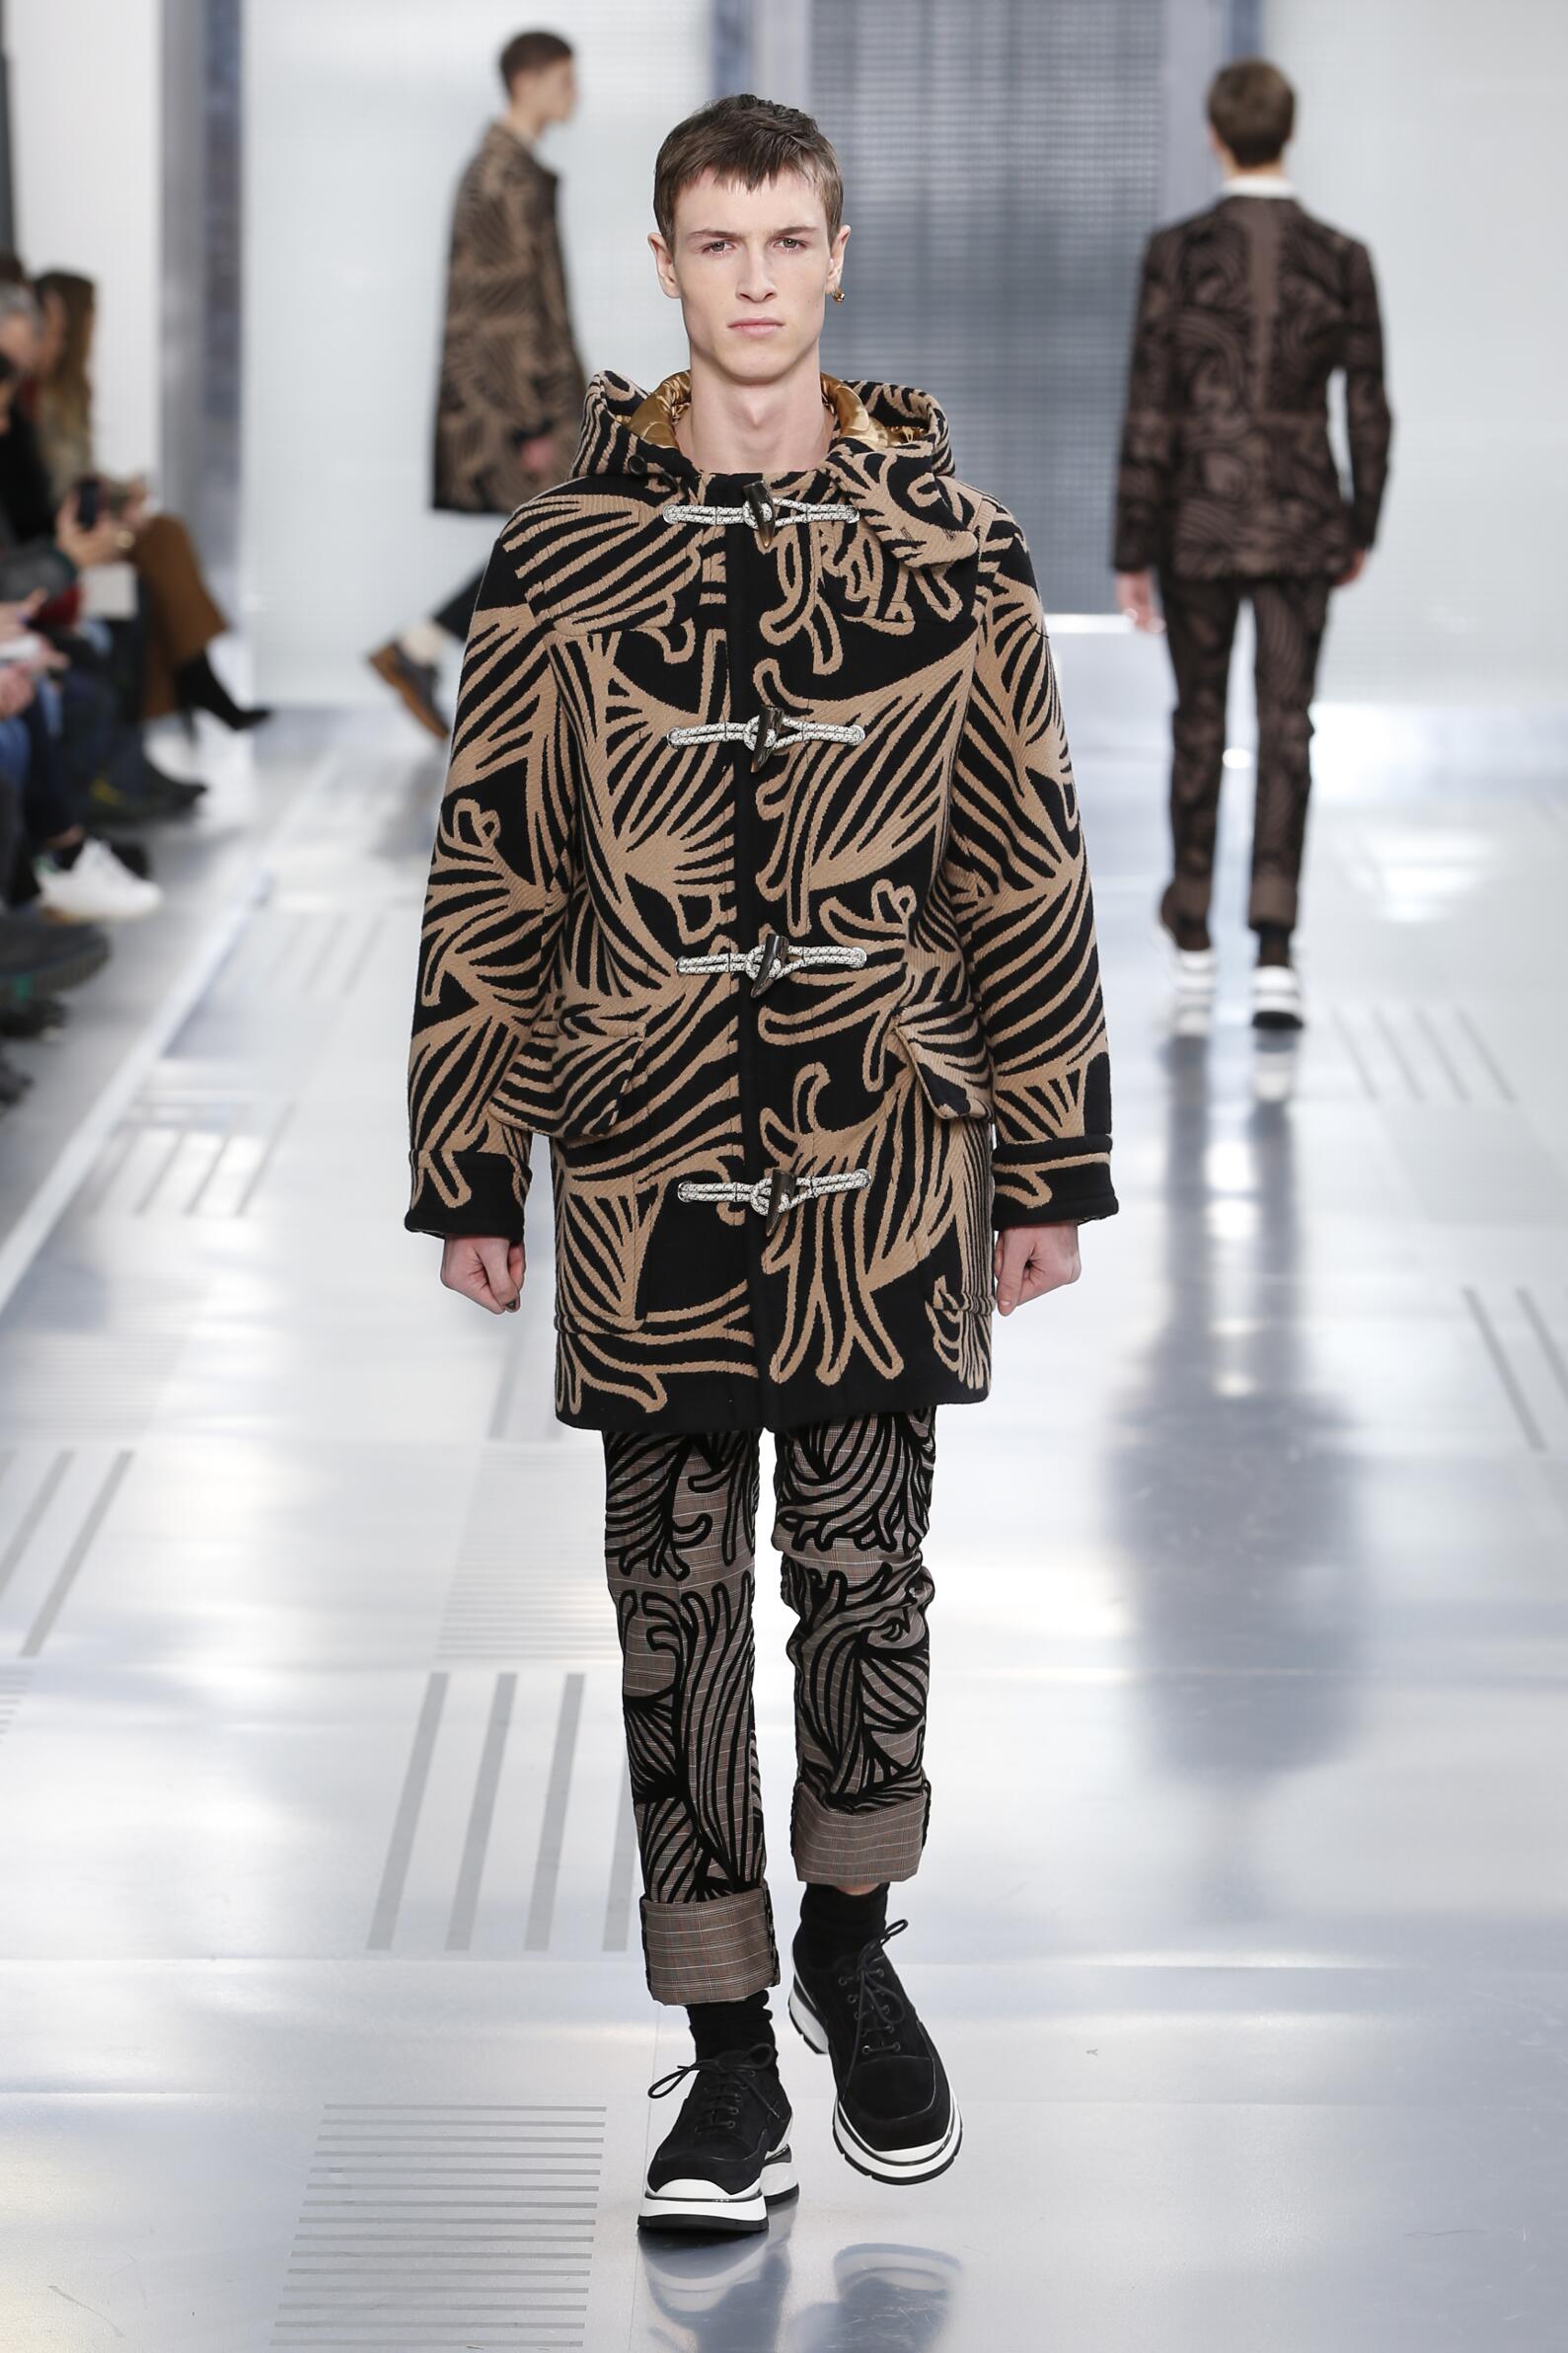 LOUIS VUITTON FALL WINTER 2015-16 MEN’S COLLECTION | The Skinny Beep